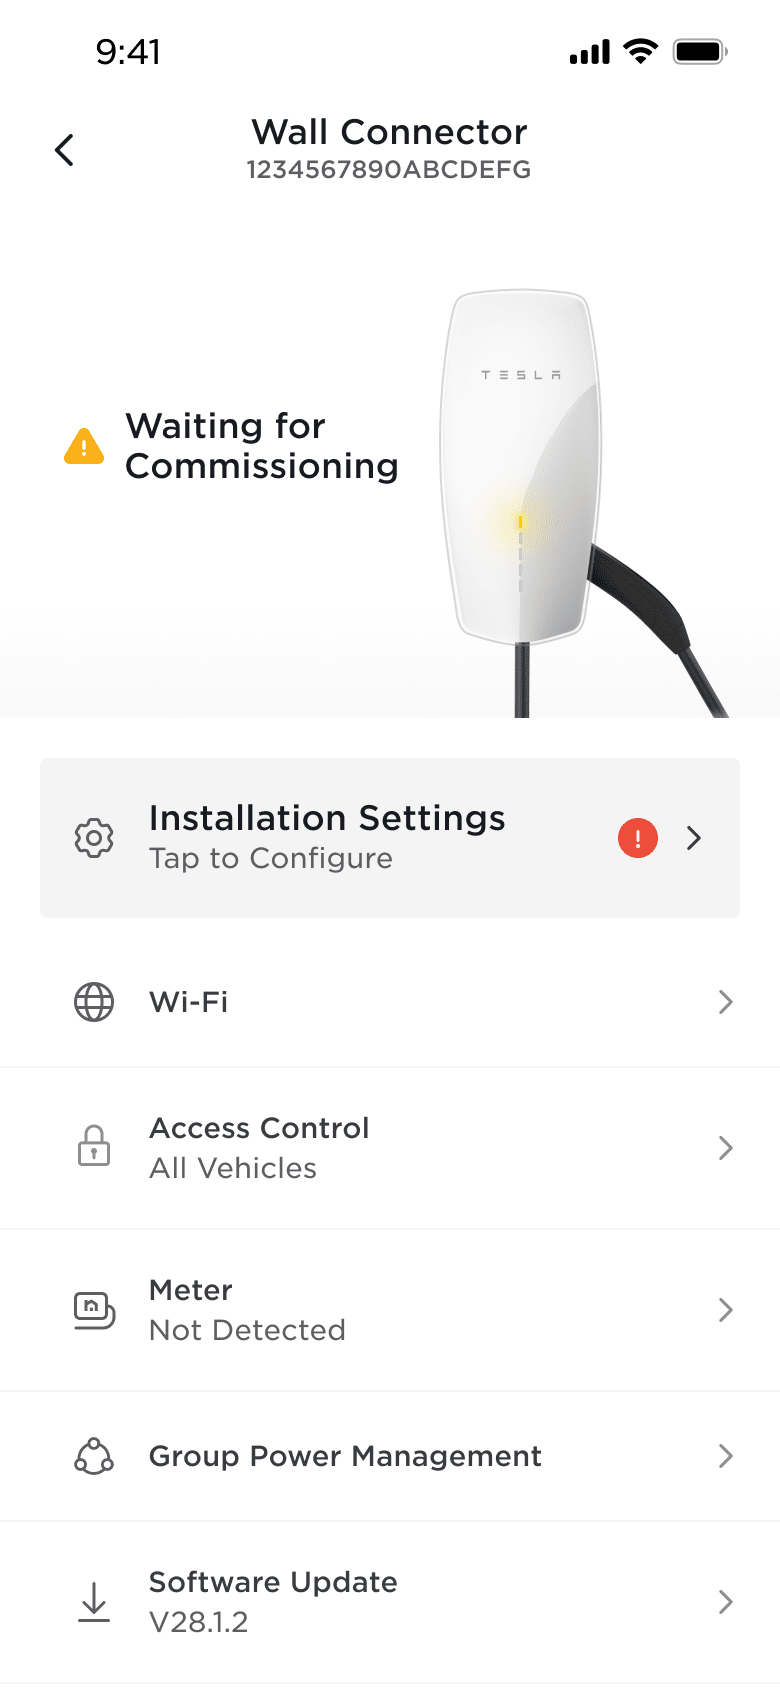 Tesla app screen showing installation setting for Wall Connector